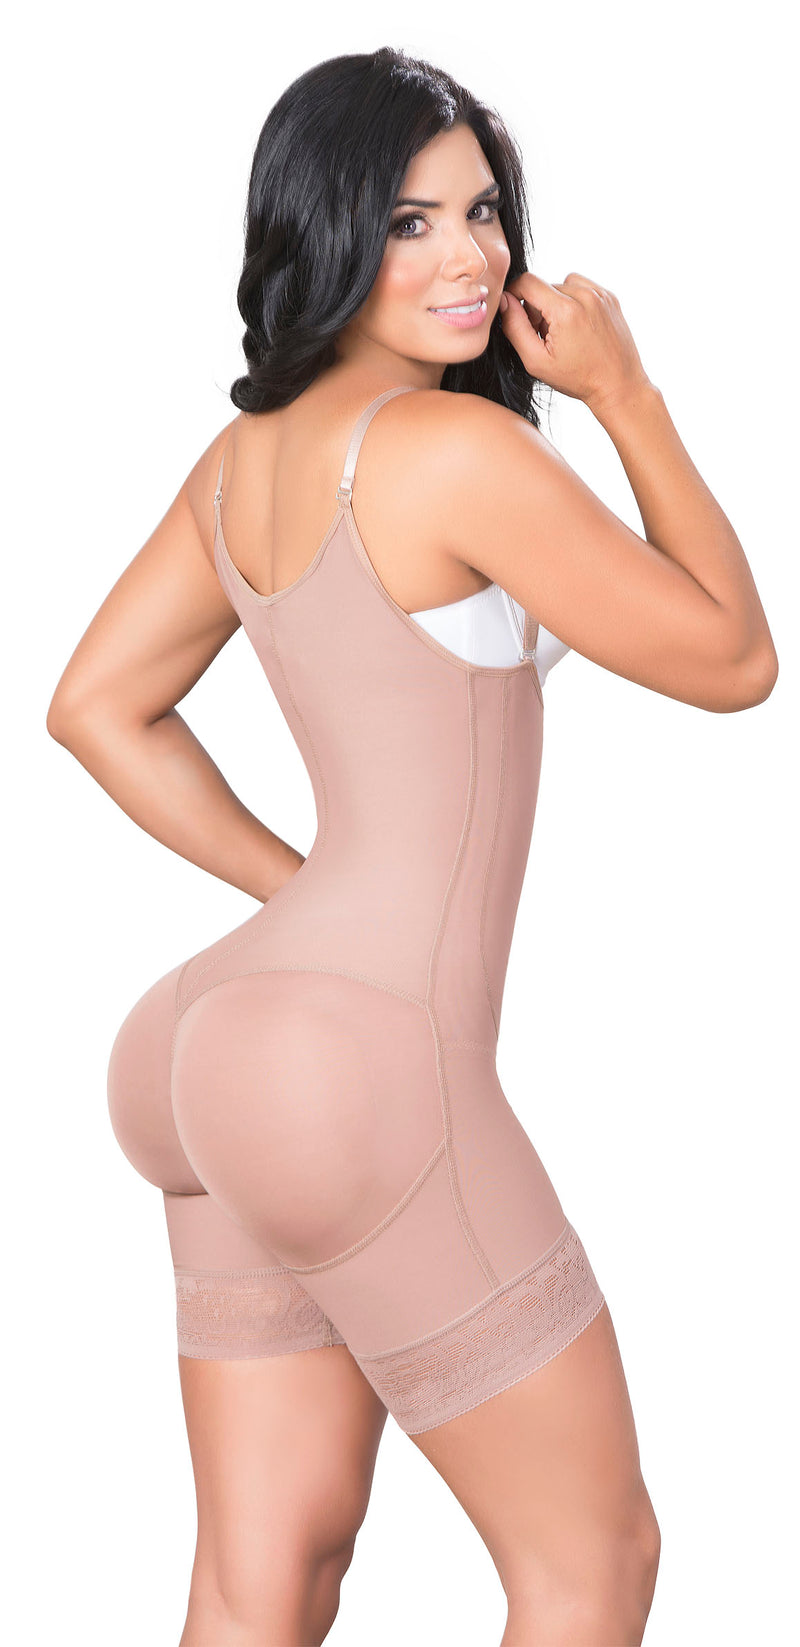 Shorts Bodyshaper With Covered Back 2010